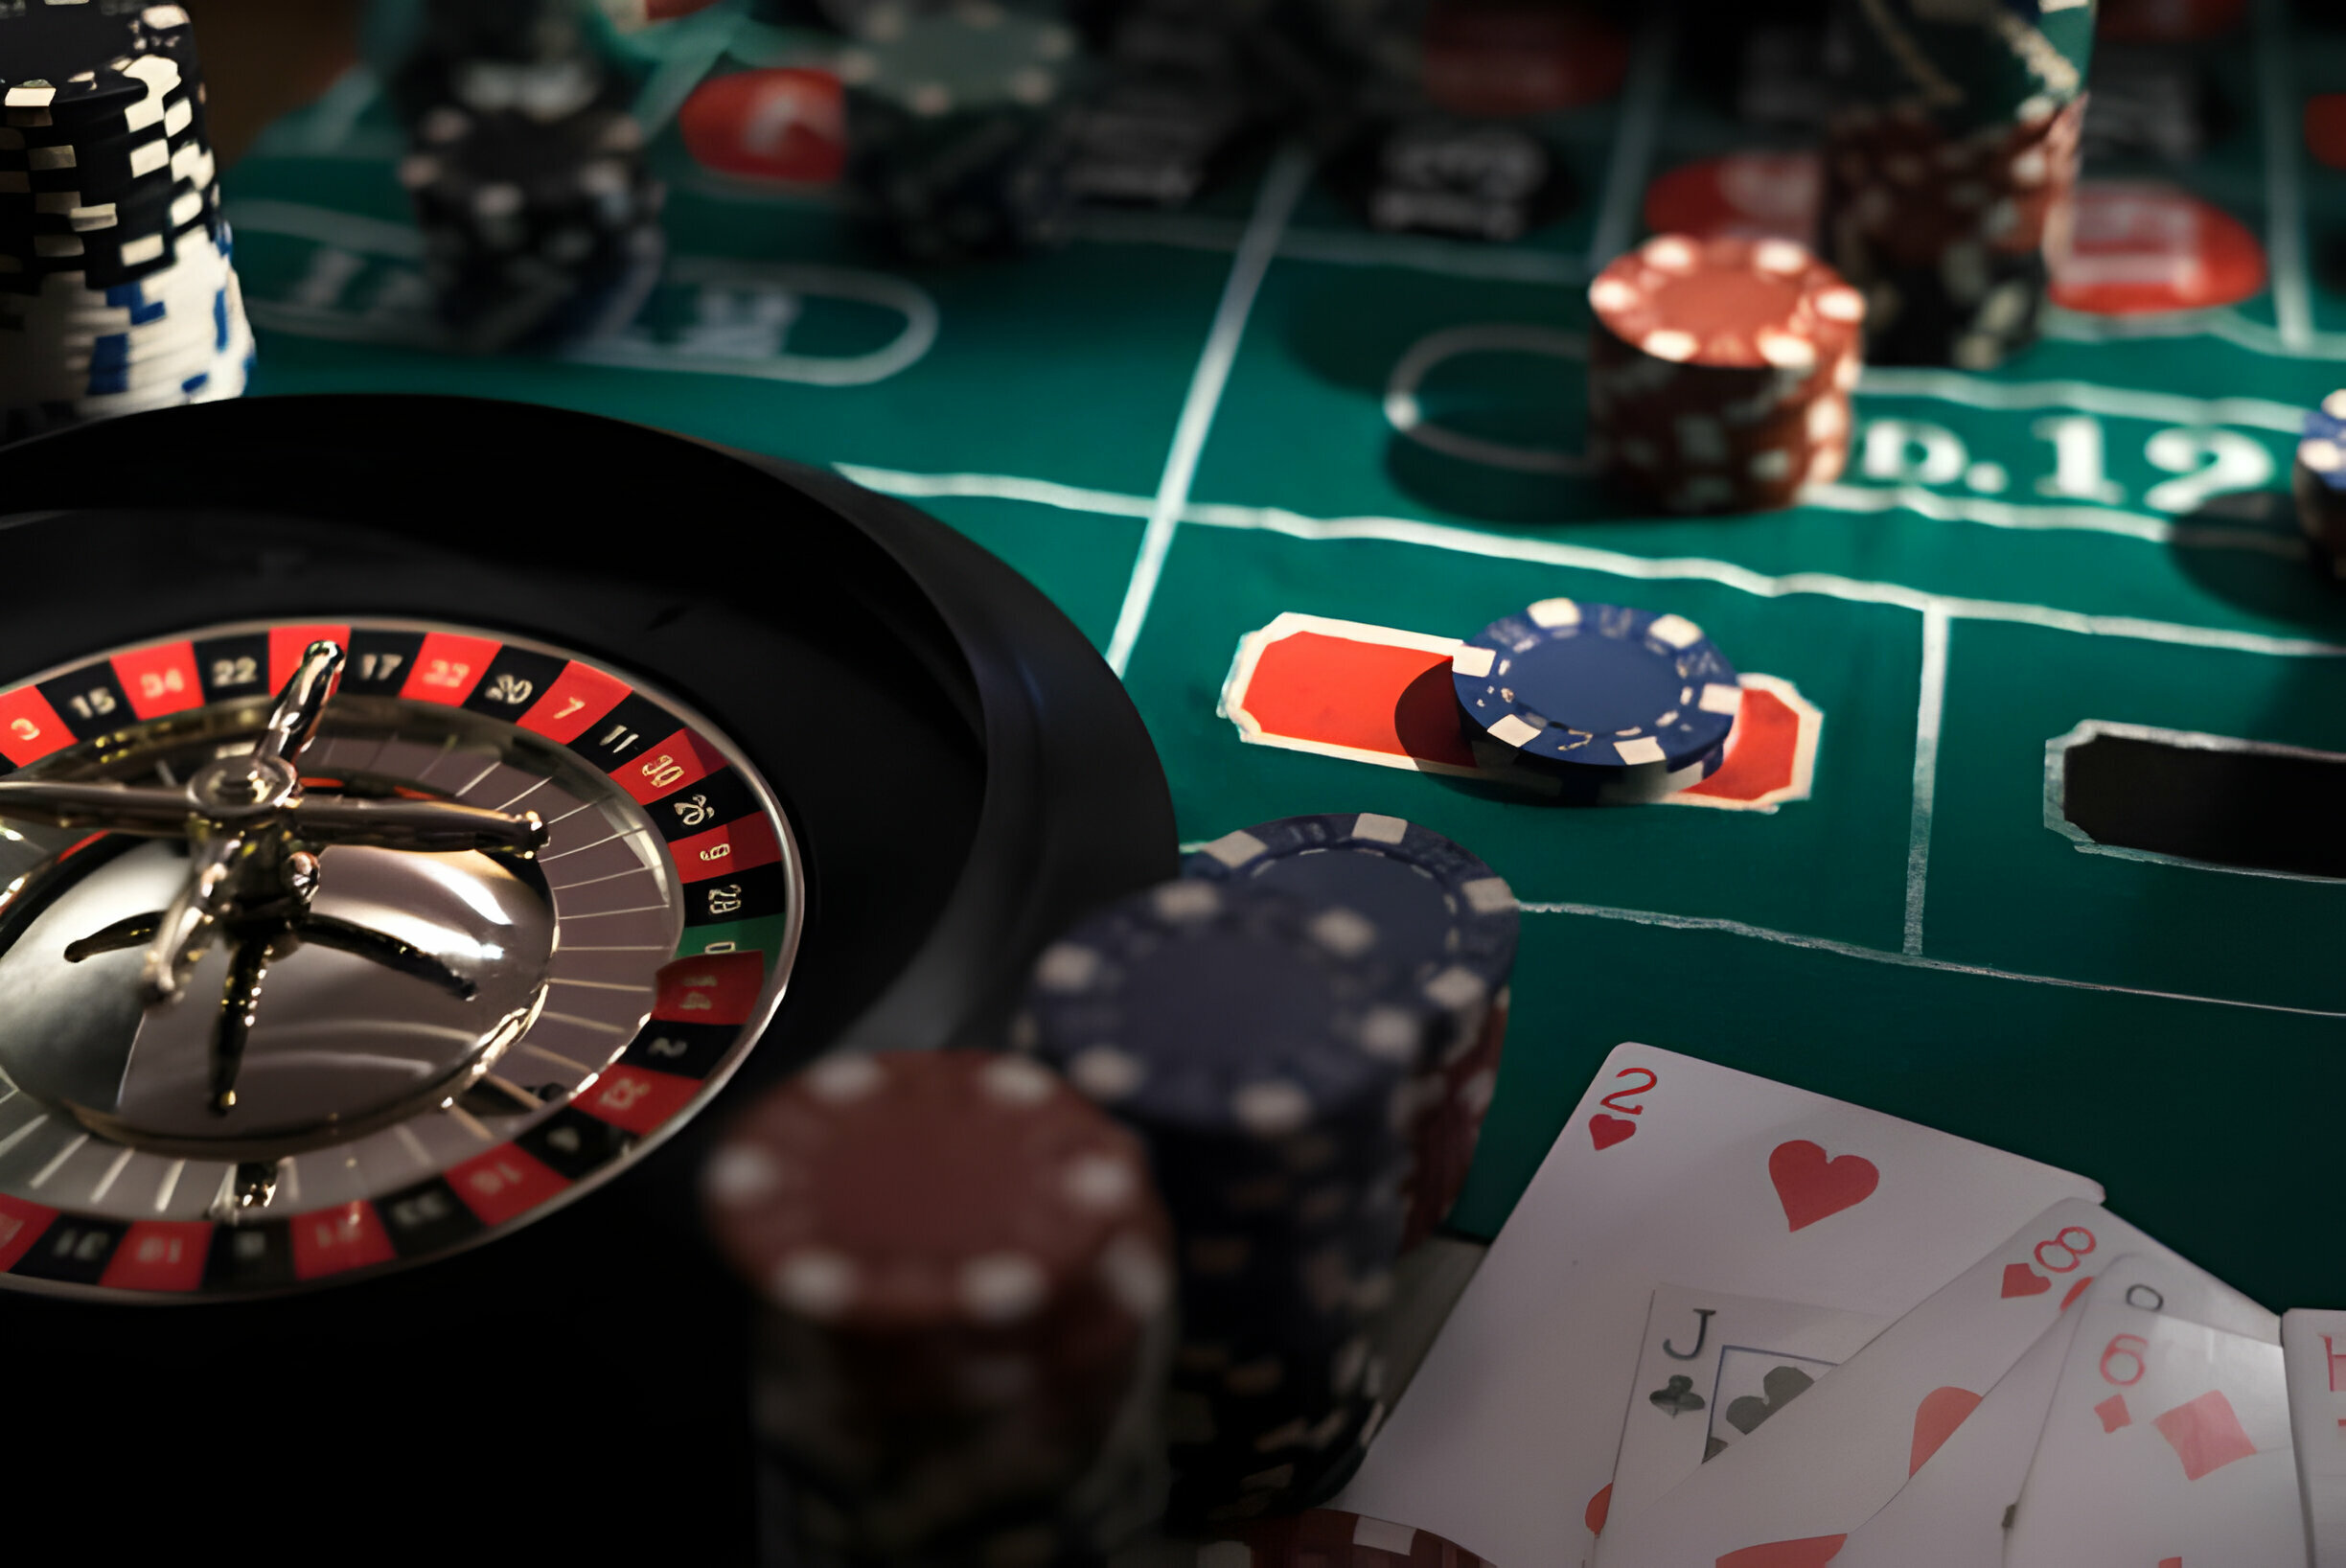 What Are the Benefits of Playing Casino Games?